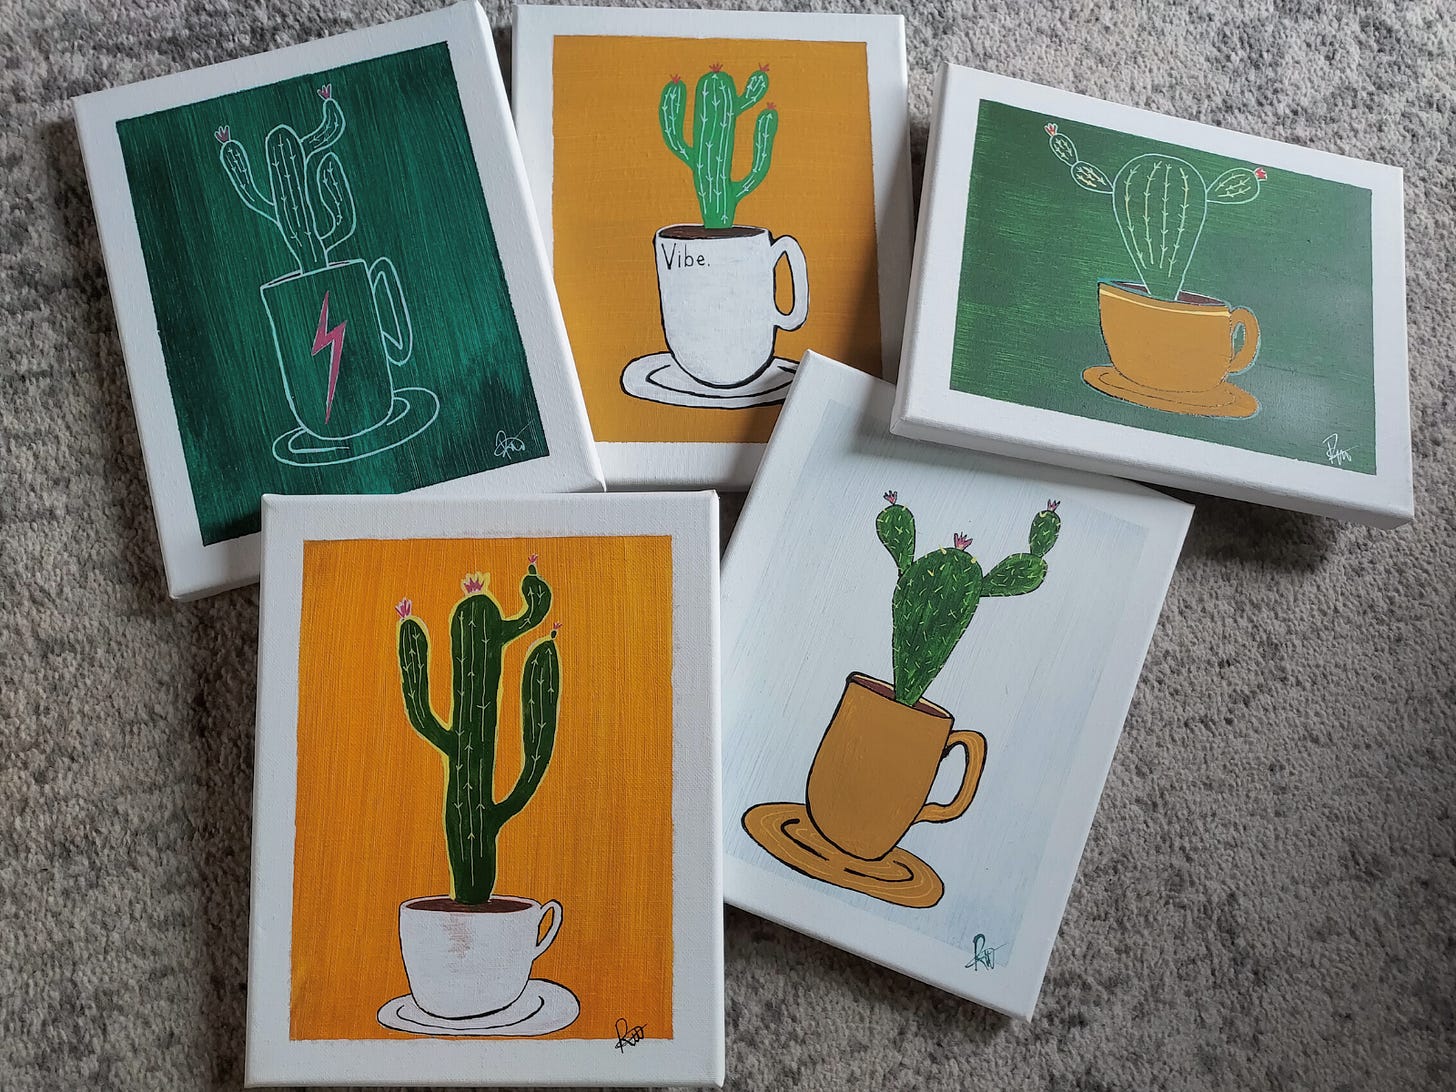 A wide shot of five paintings on the ground. They are poorly painted cactus coming out of coffee mugs in various colors of mustard, white, and green.